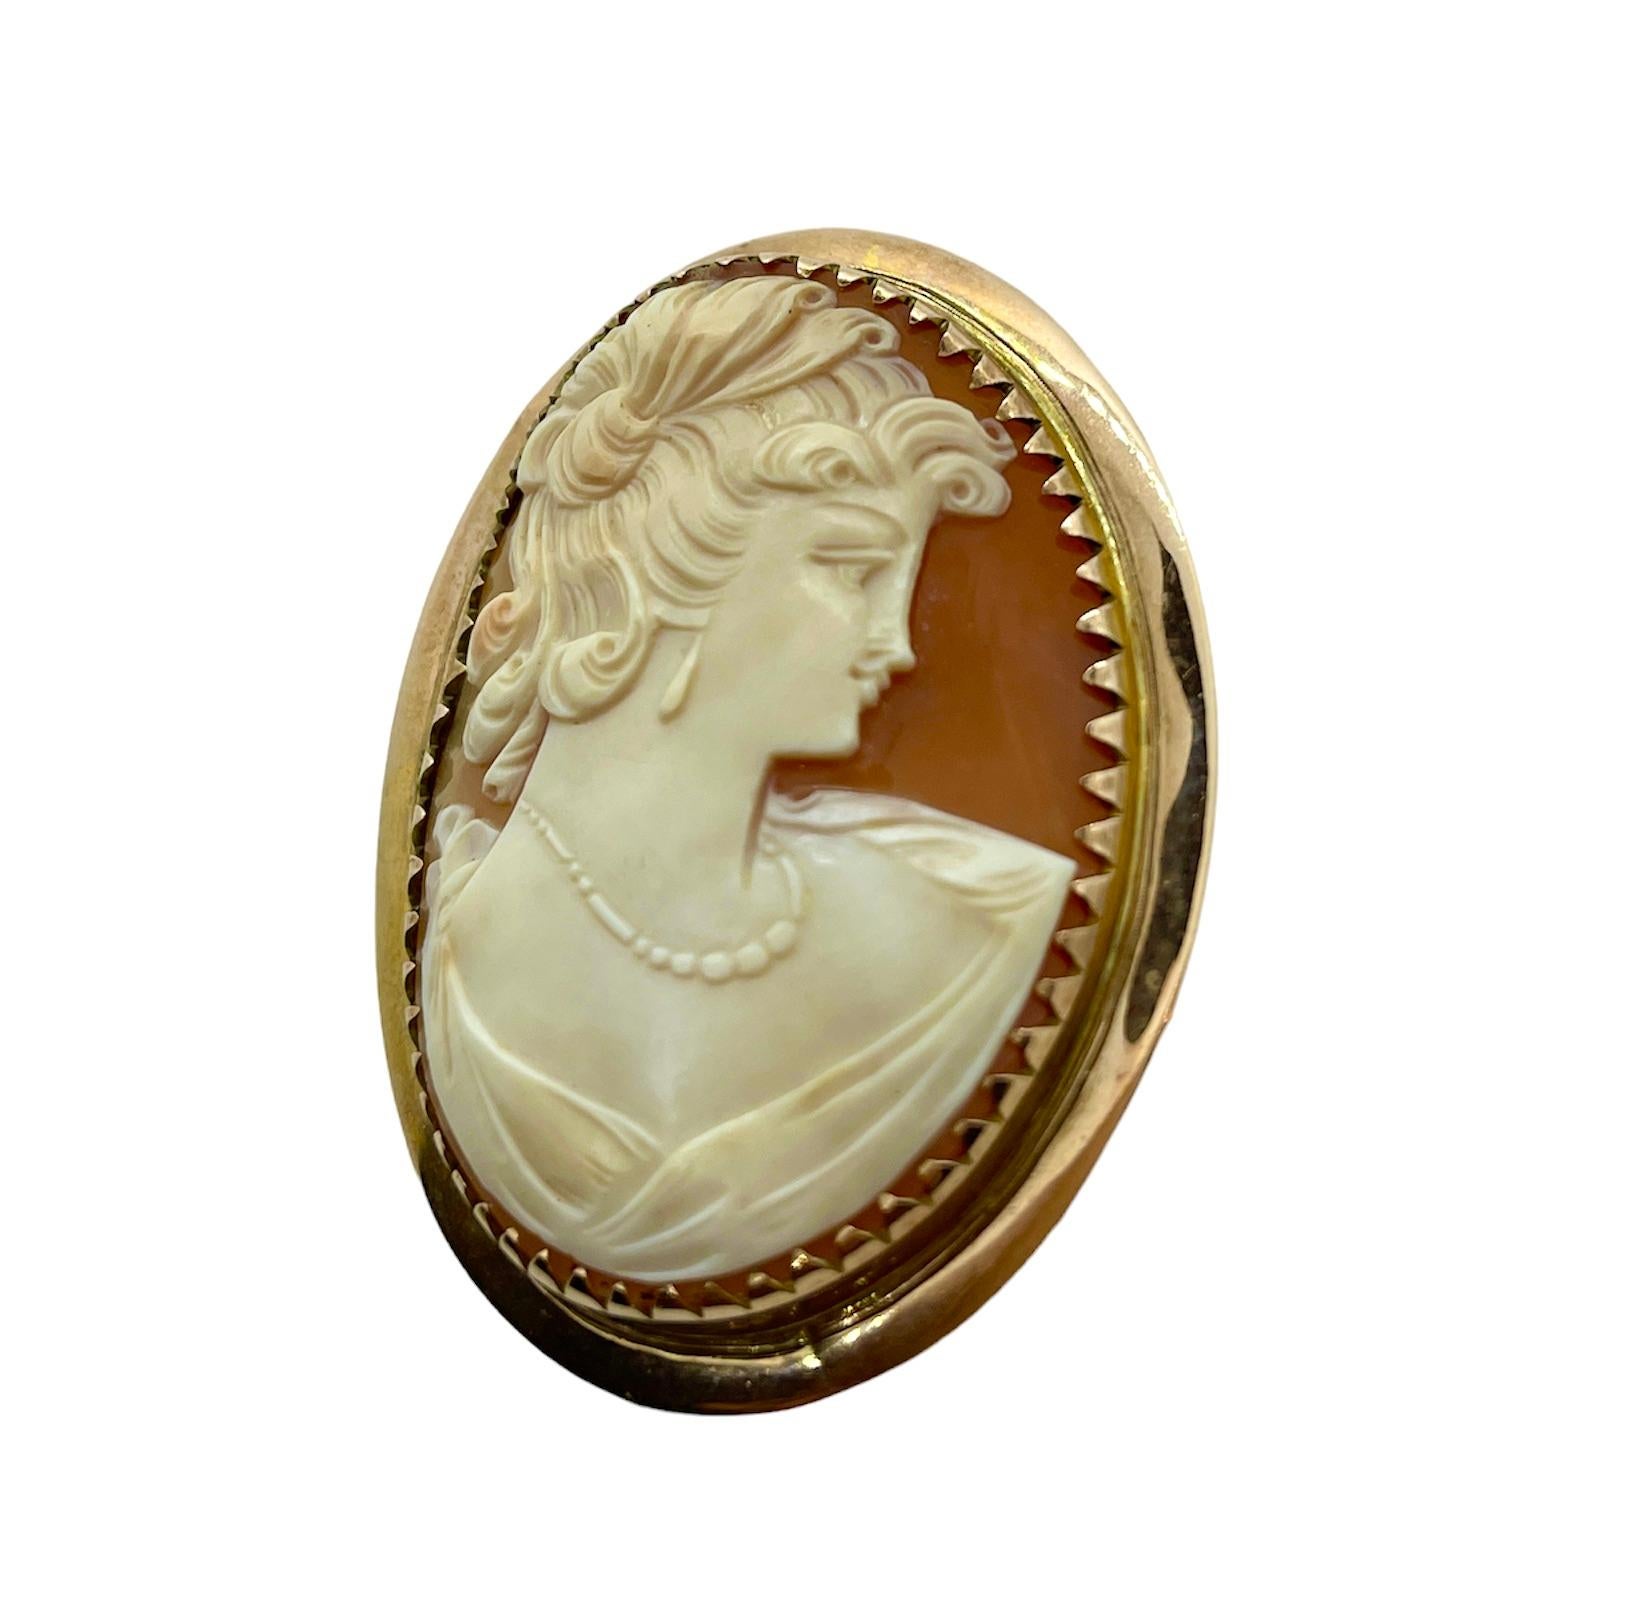 Vintage 9ct Gold Cameo Brooch NeoClassical Lady Wearing Earrings Necklace c1940s For Sale 6